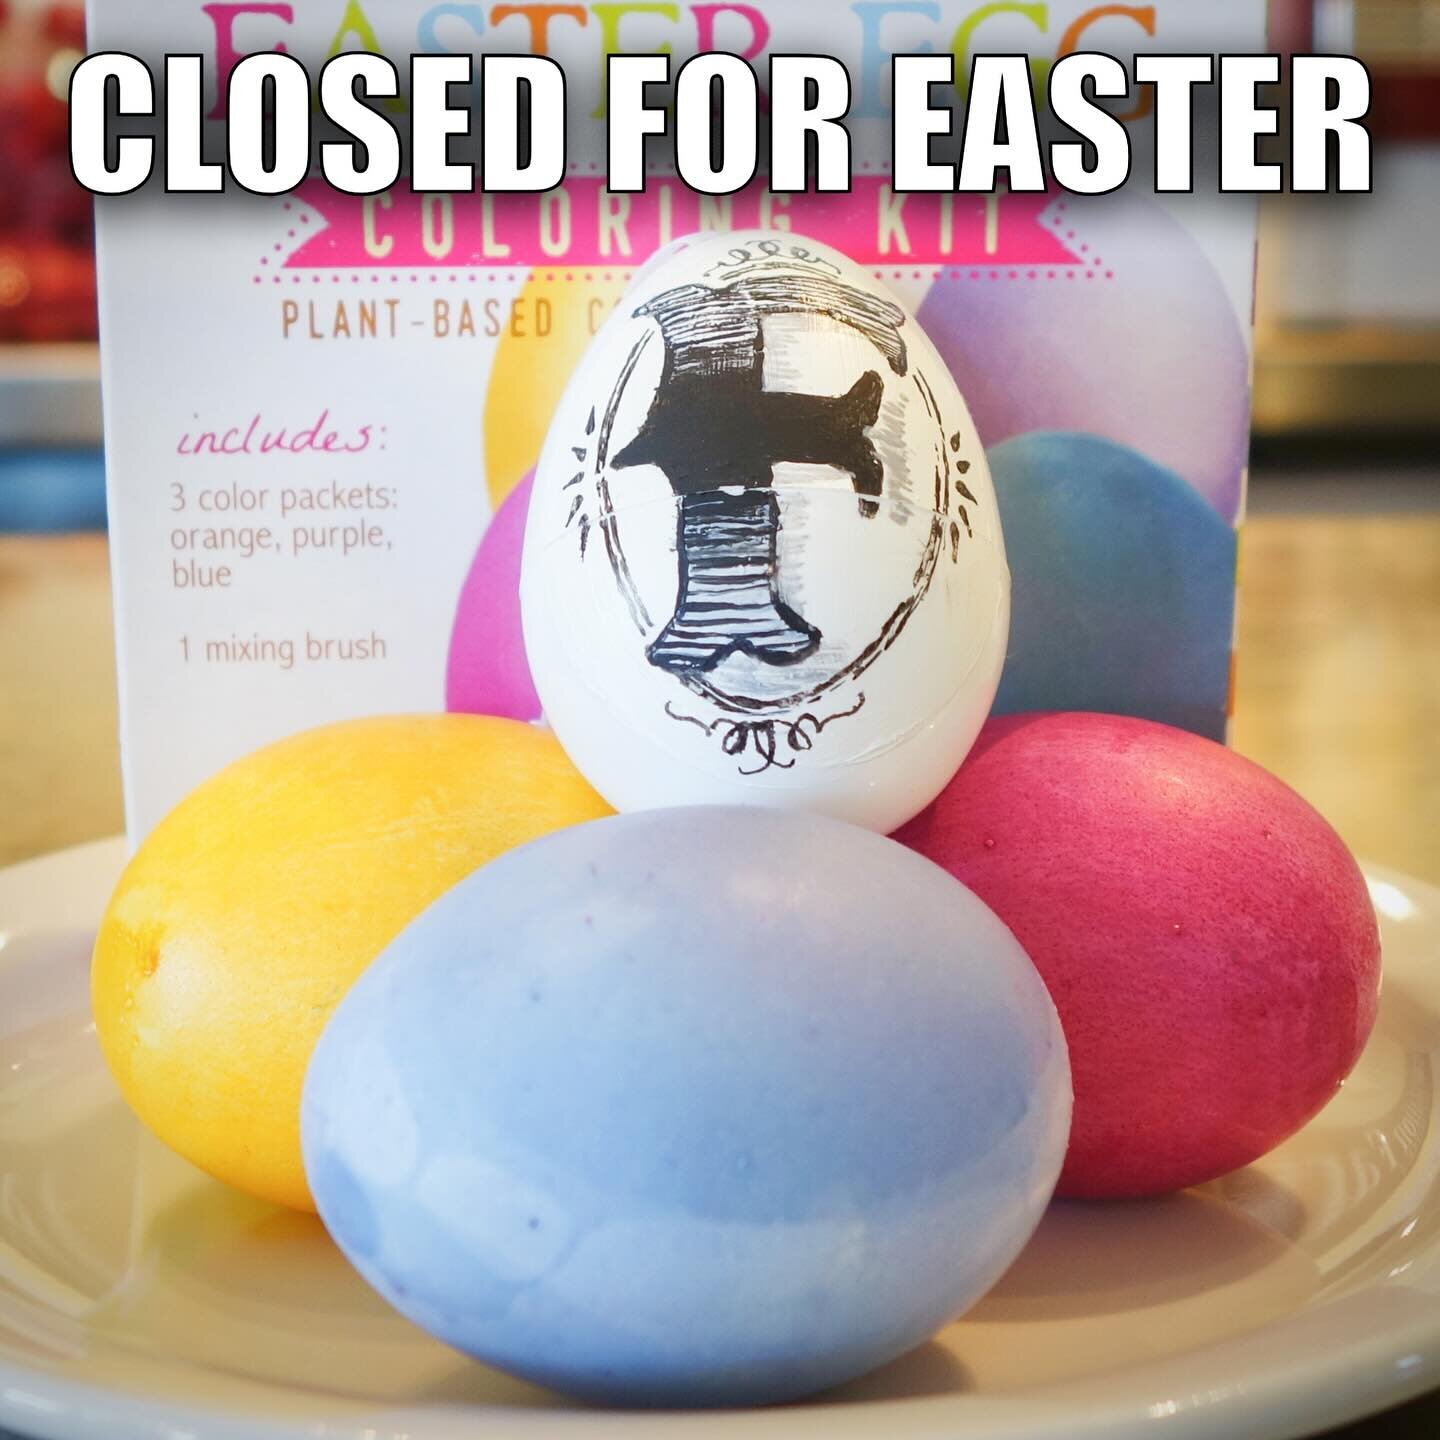 🌷🐣 Easter Holiday Hours Update 🐣🌷

As we hop into the Easter weekend, we wanted to share a quick reminder about our holiday hours. We will be closed this Sunday to allow our team to celebrate with their families, but don&rsquo;t worry, we&rsquo;l